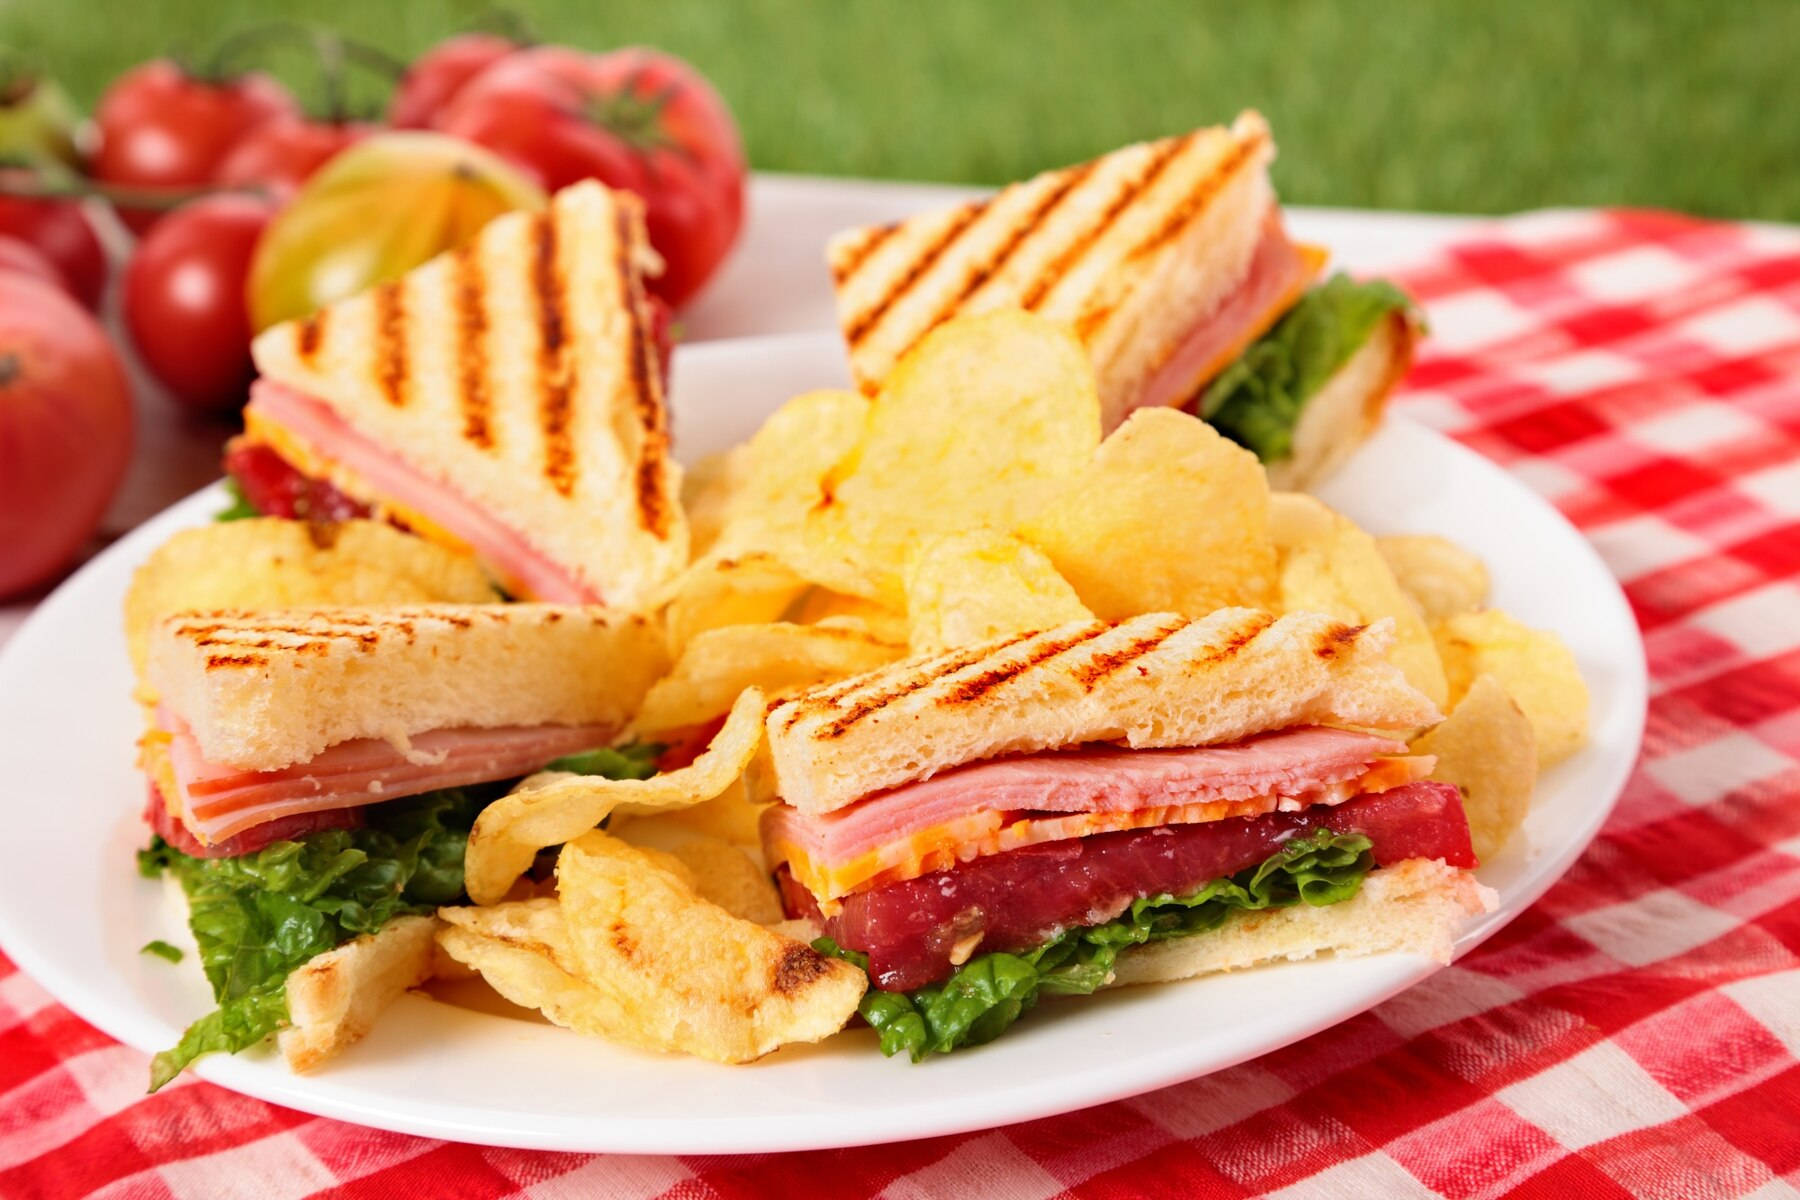 Grilled Sandwiches With Chips